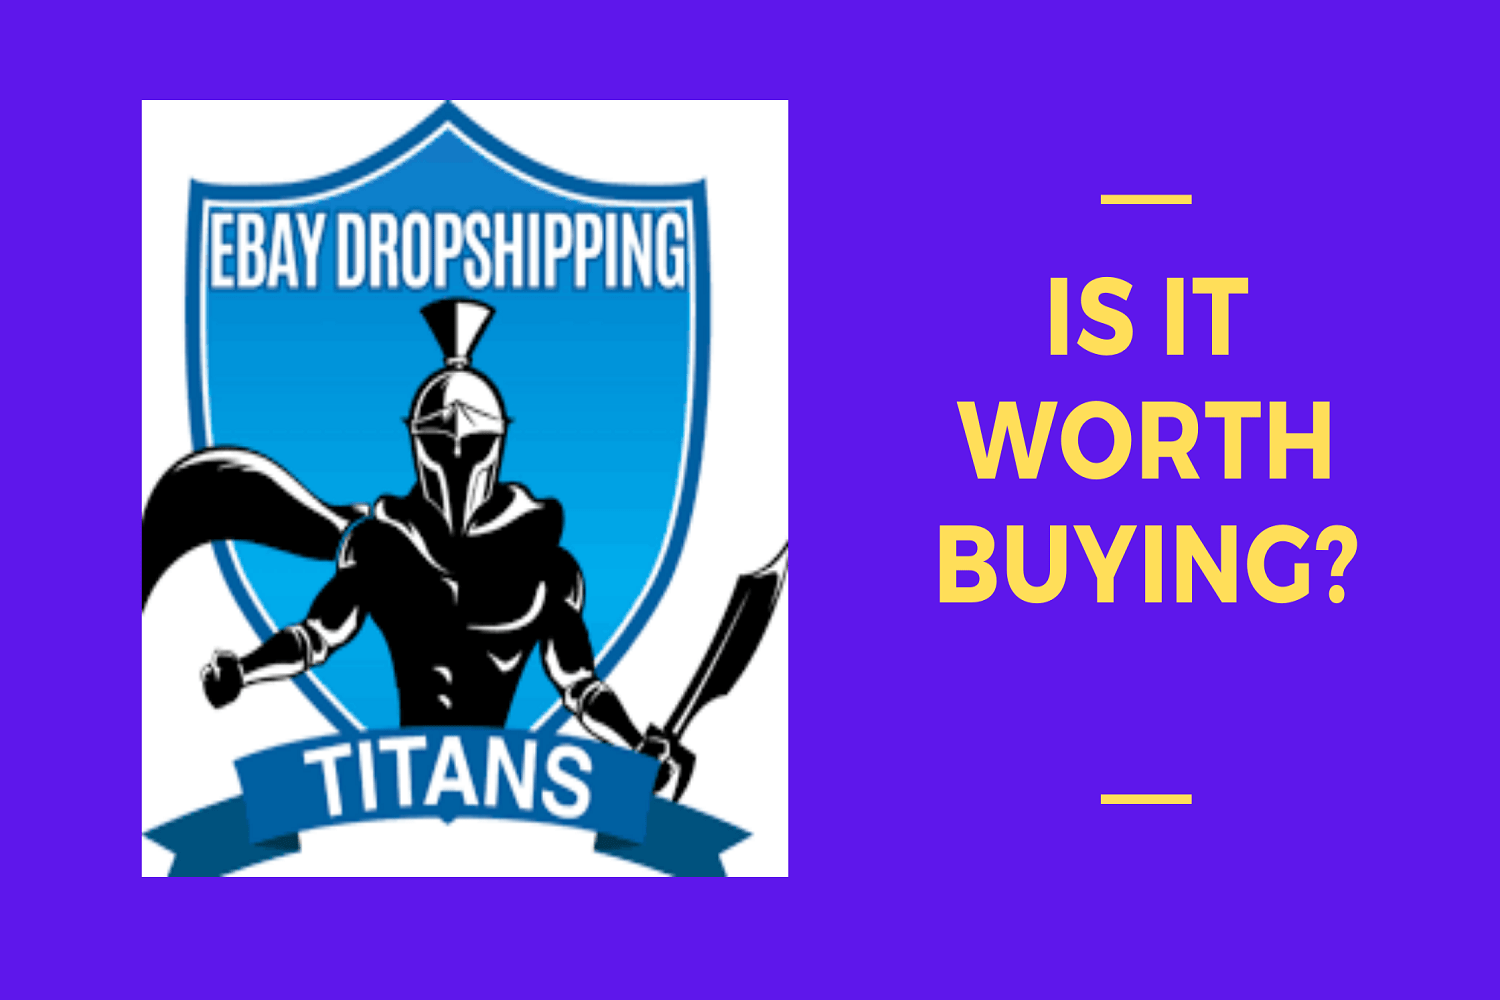 Dropshipping Titans Review: Is It Worth Buying? | Abdul Ehsan | Entrepreneur and Digital Marketing Consultant in Sri Lanka